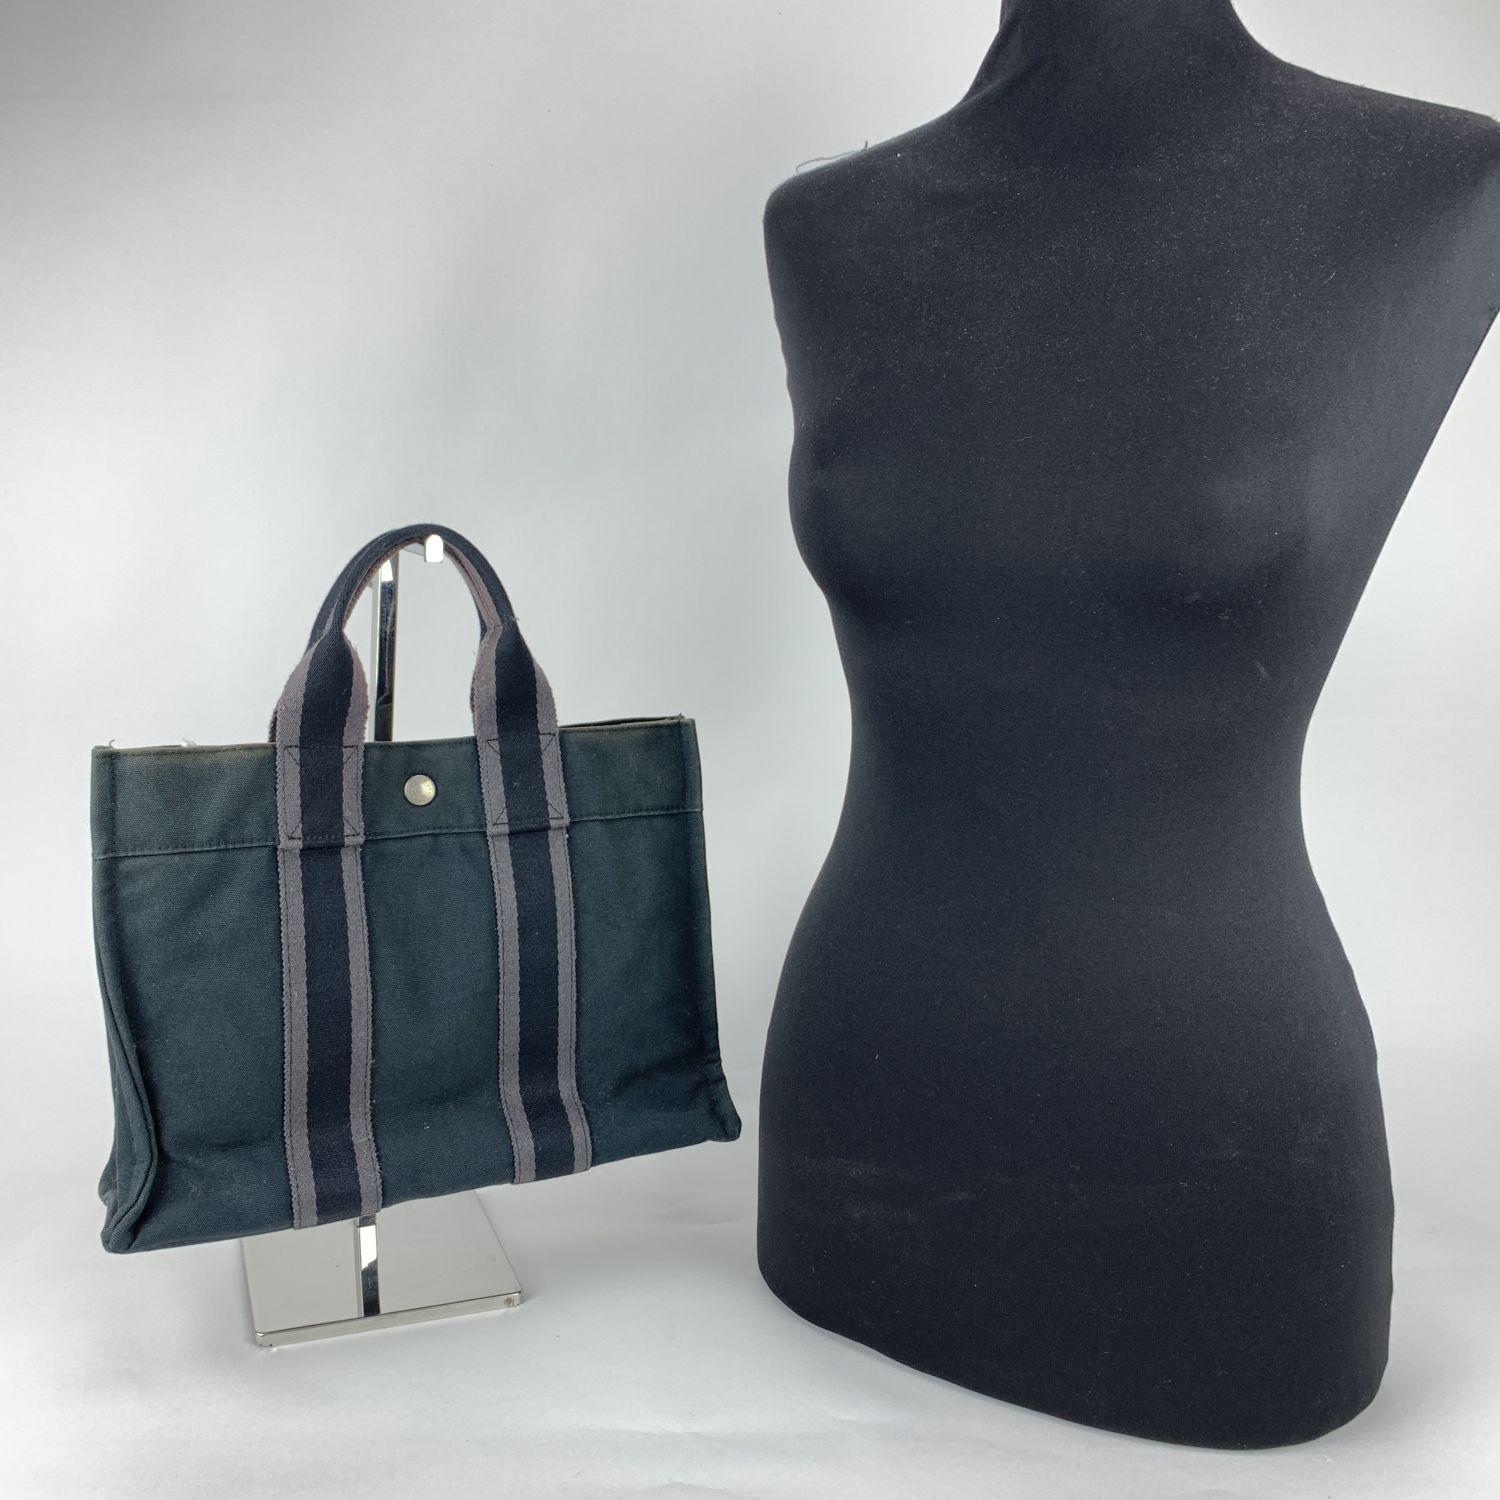 - Model: 'HERMES FOURRE TOUT - PM' Tote handbag
- Made in France
- Color: Black with Gray stripes
- Material: 100% cotton
- It has snaps on both ends for expansion
- Durable canvas handles, perfect for casual and everyday use.
- Open top with middle